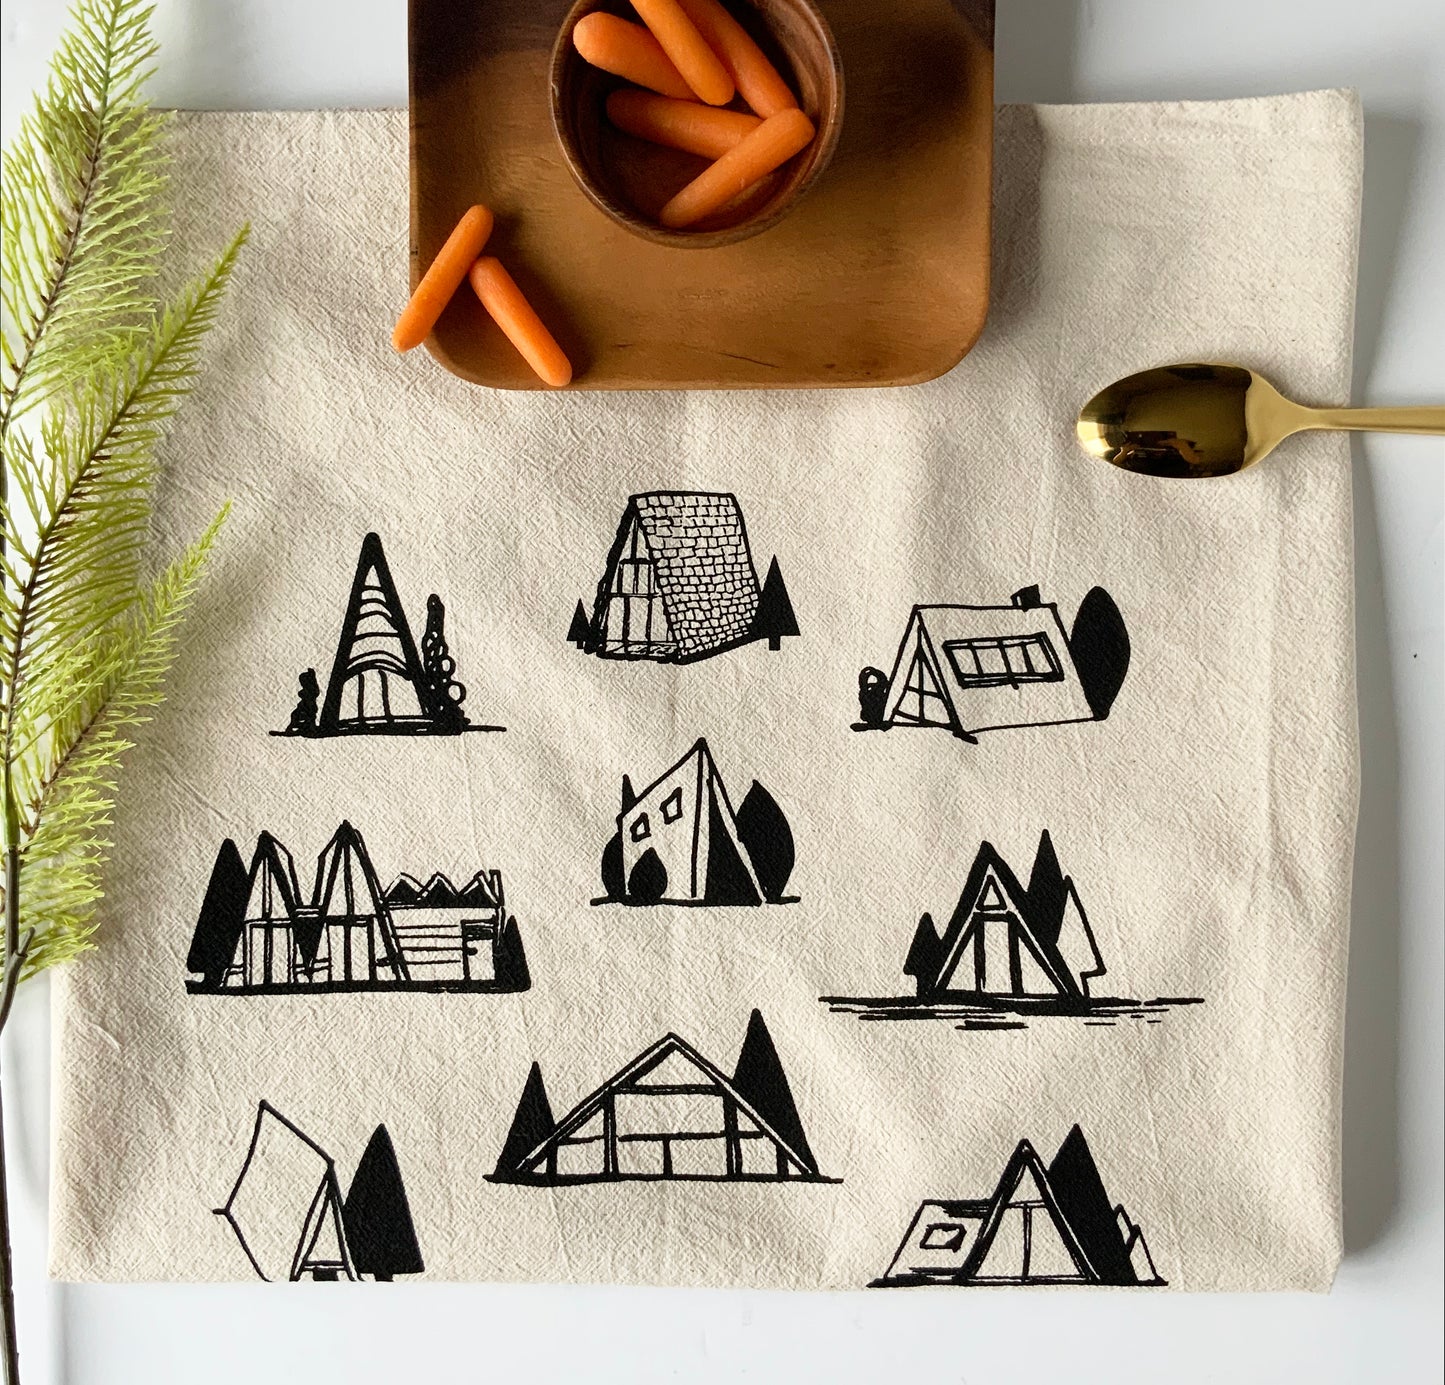 A-Frame Cottages Hand Printed Organic Tea Towel